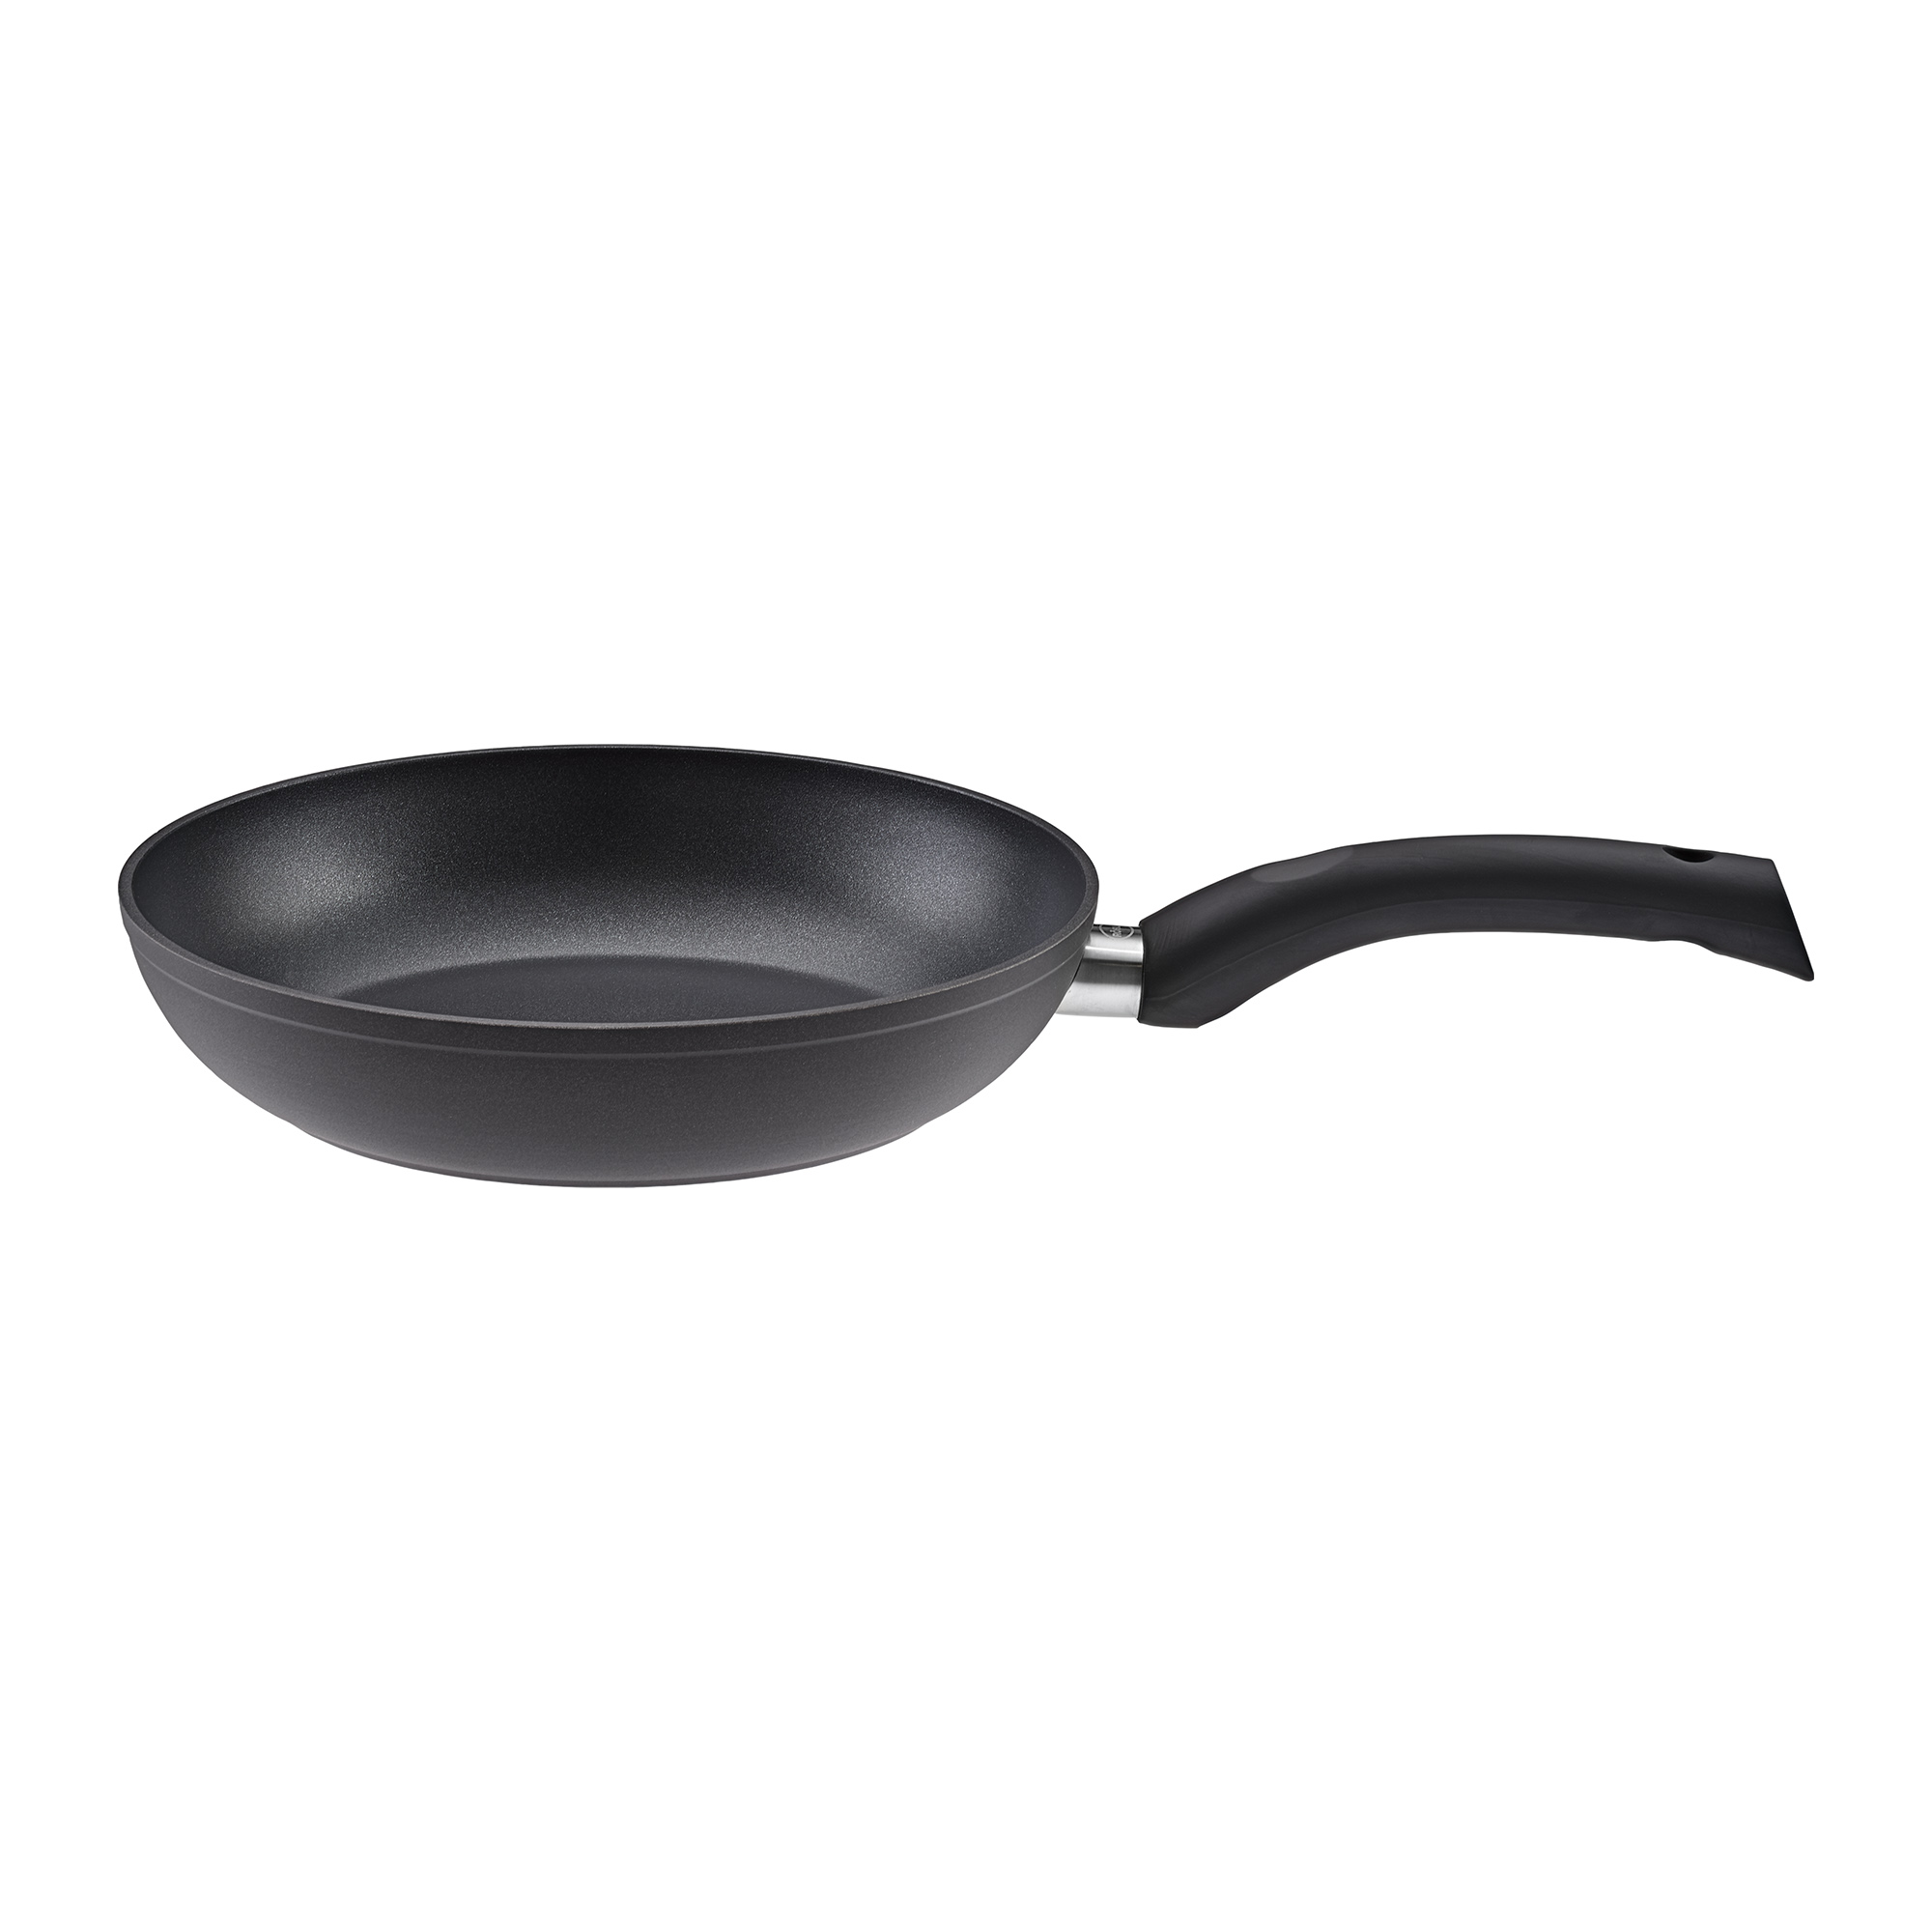 Frying pan "Moments" Ø 24 cm with non-stick coating ProPlex